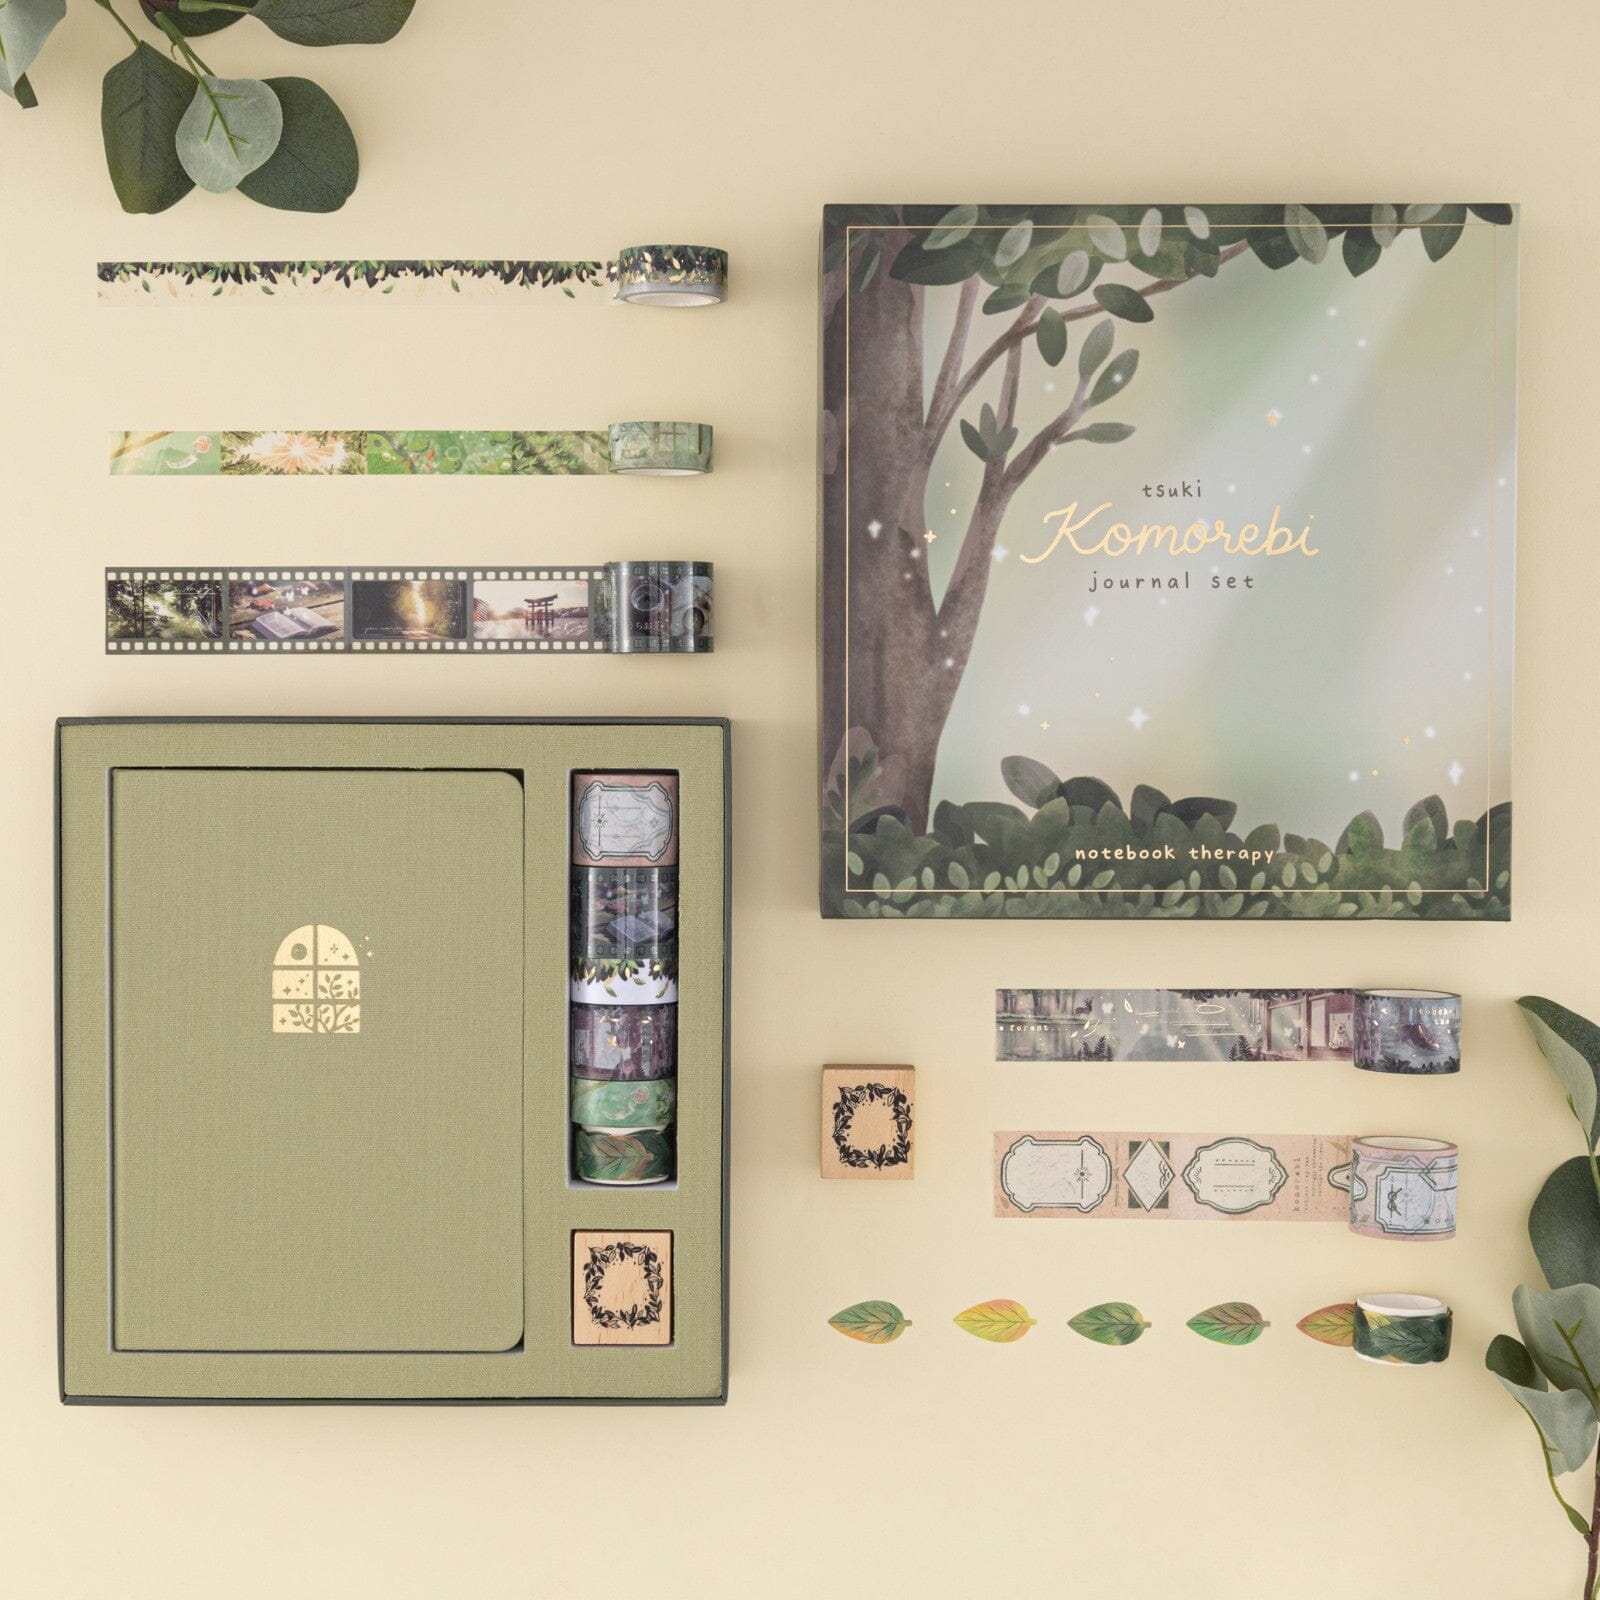 Flatlay of Tsuki ‘Komorebi’ journal set, opened box with 6x washi tapes, green linen bullet journal and a wreath border rubber stamp